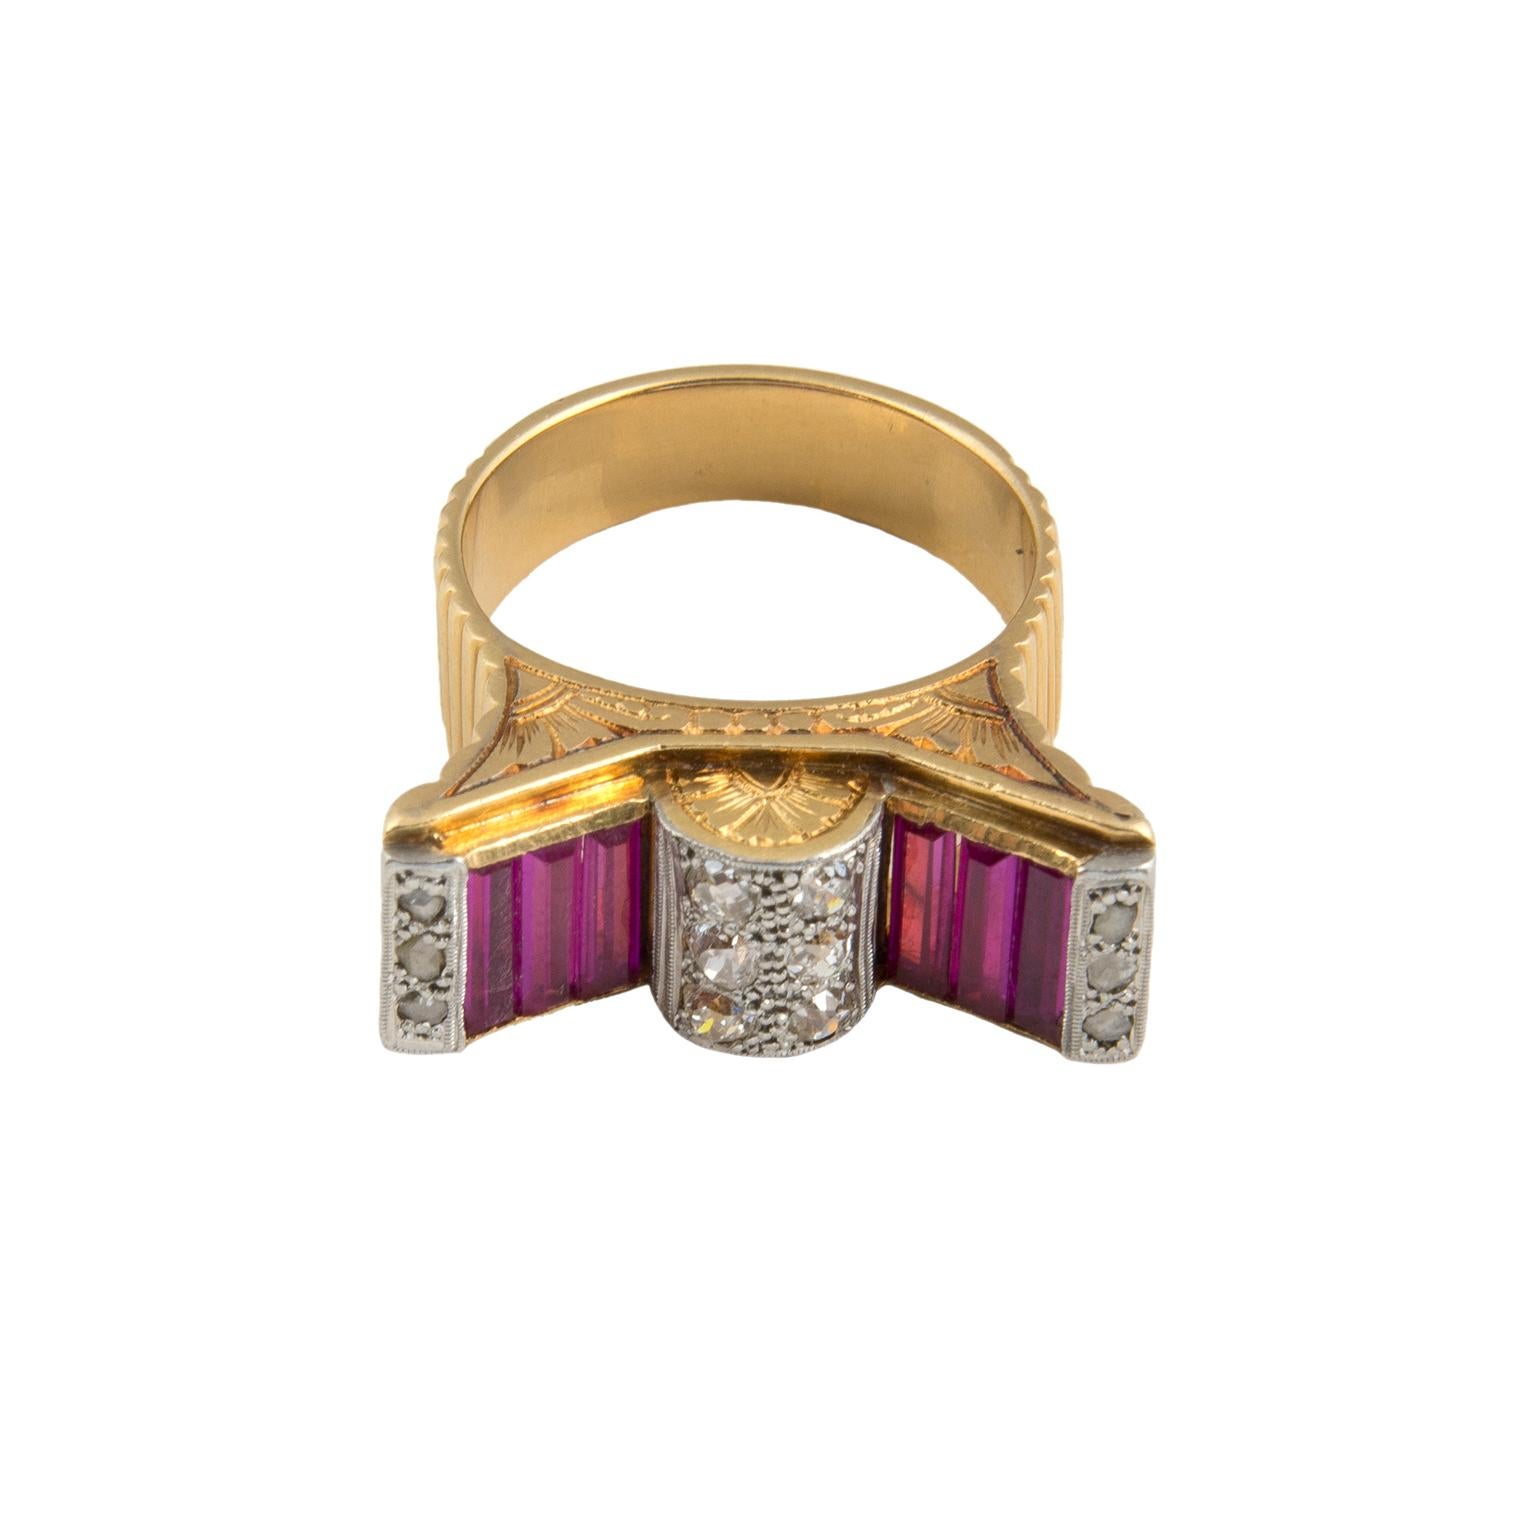 Retro ring in 18 Karat white gold-topped yellow gold, set with 0.18 carats in diamonds and red stones.
Size: Swiss 15, French 55, US 7¼, UK O